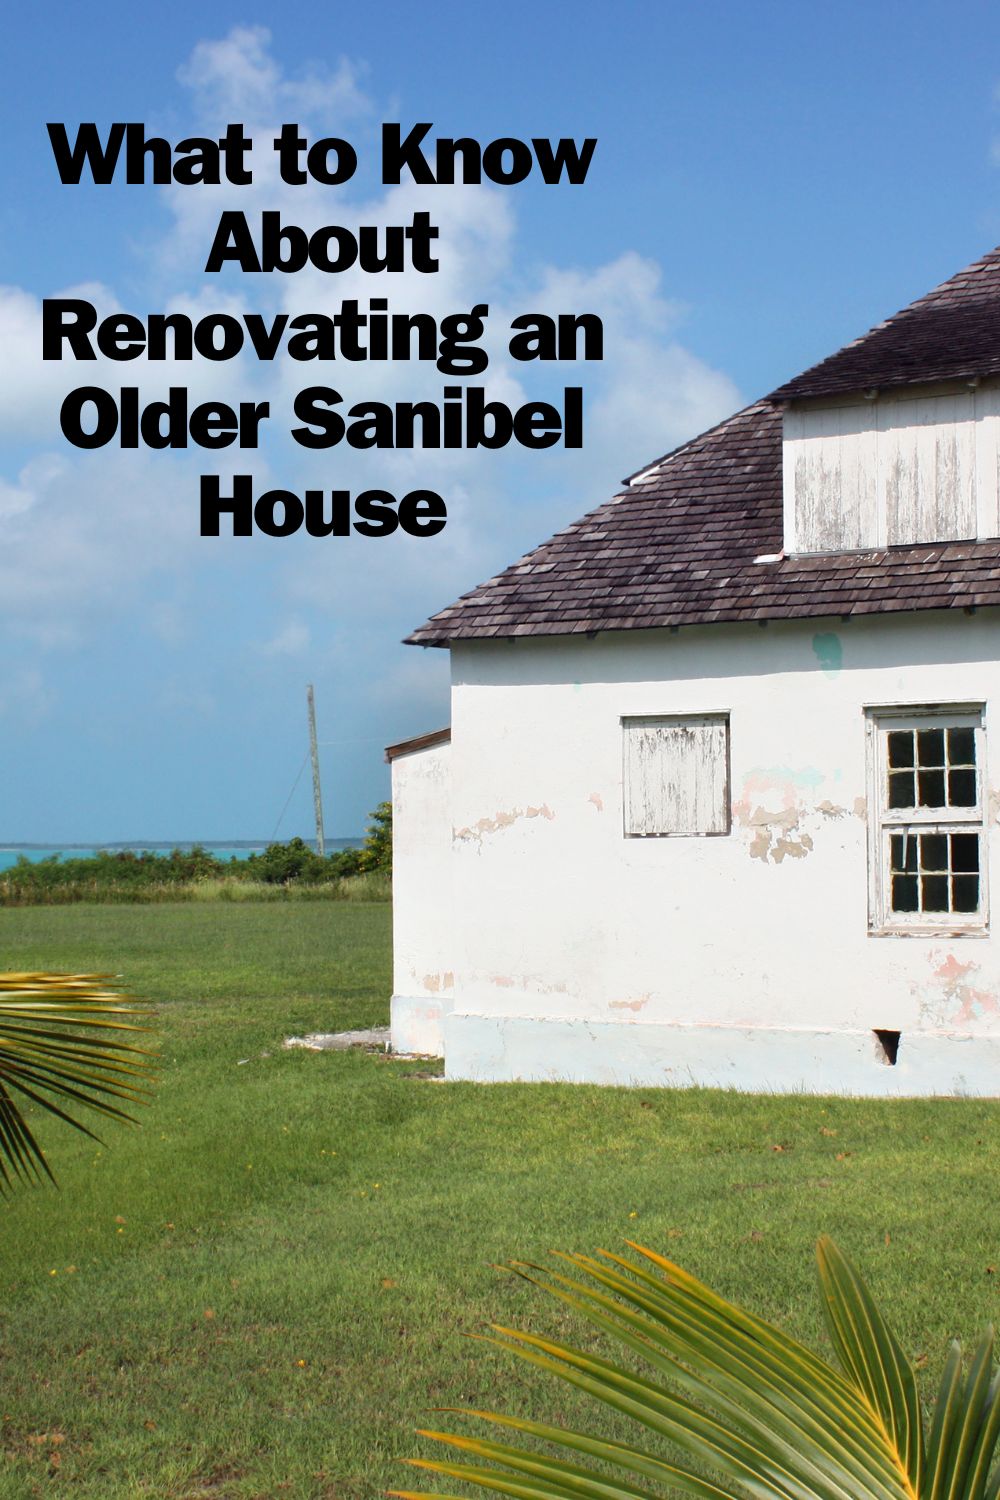 What to Know About Renovating an Older Sanibel House